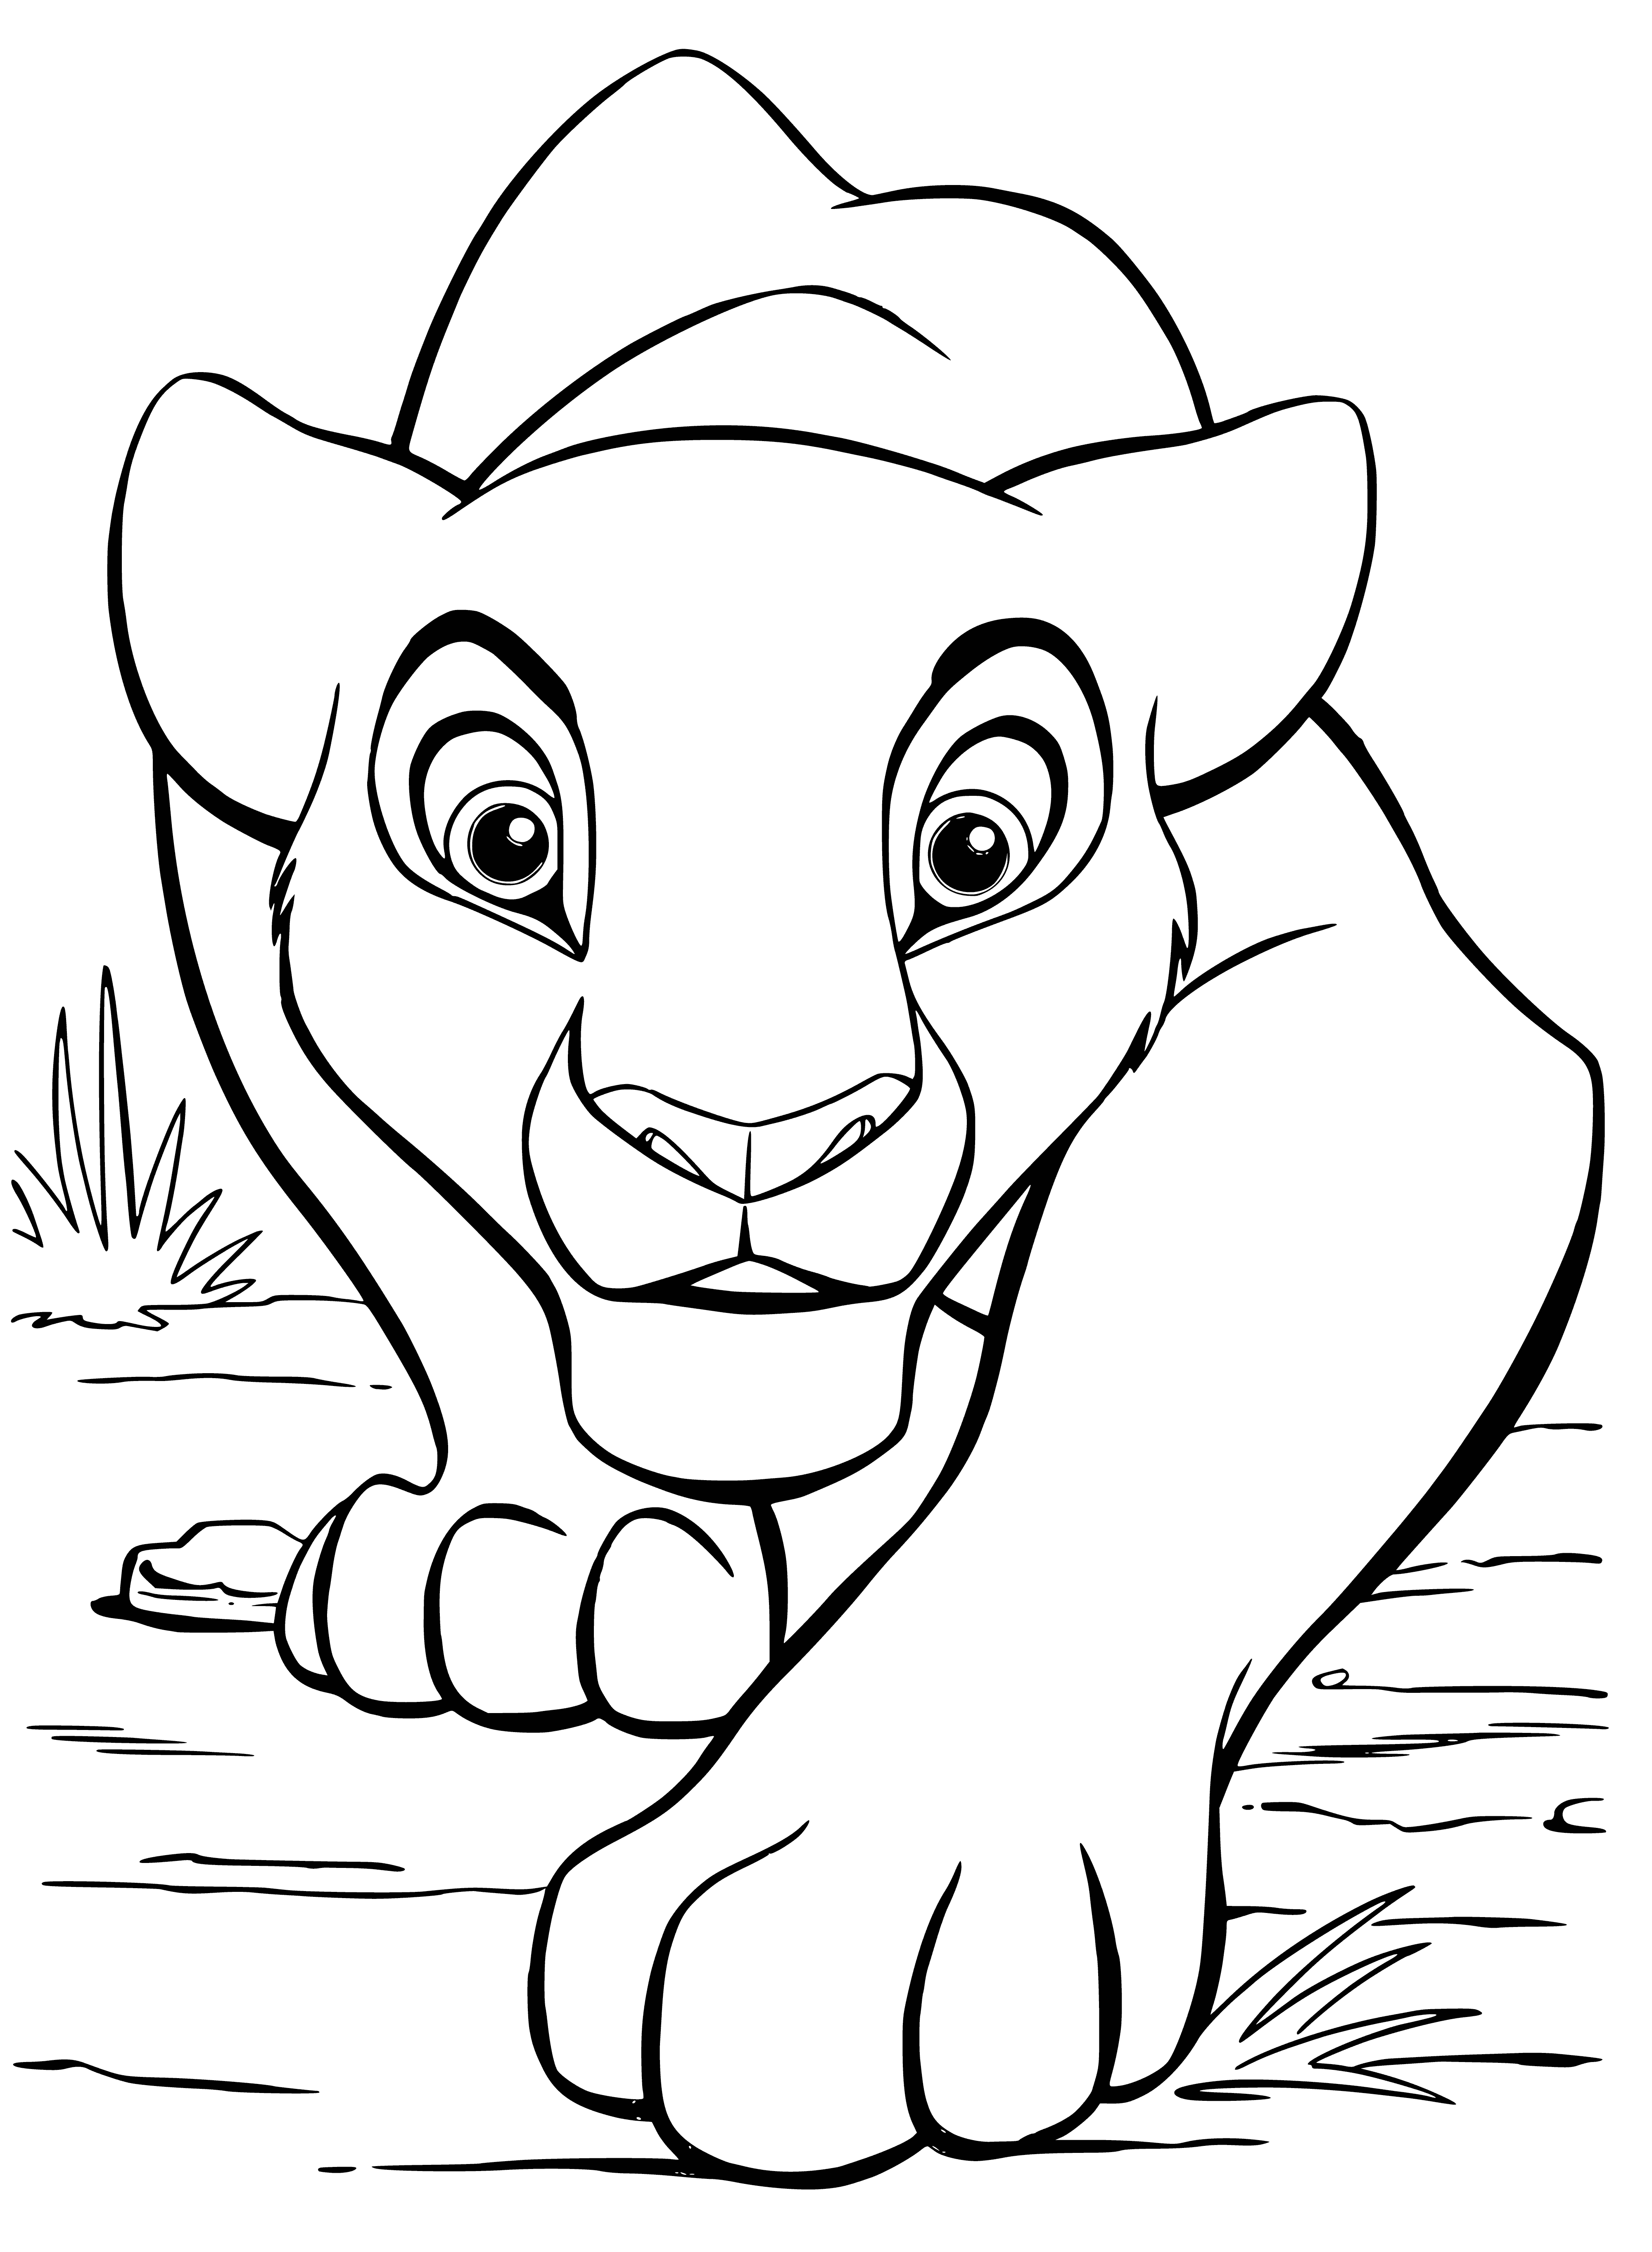 Lioness Nala on the hunt coloring page